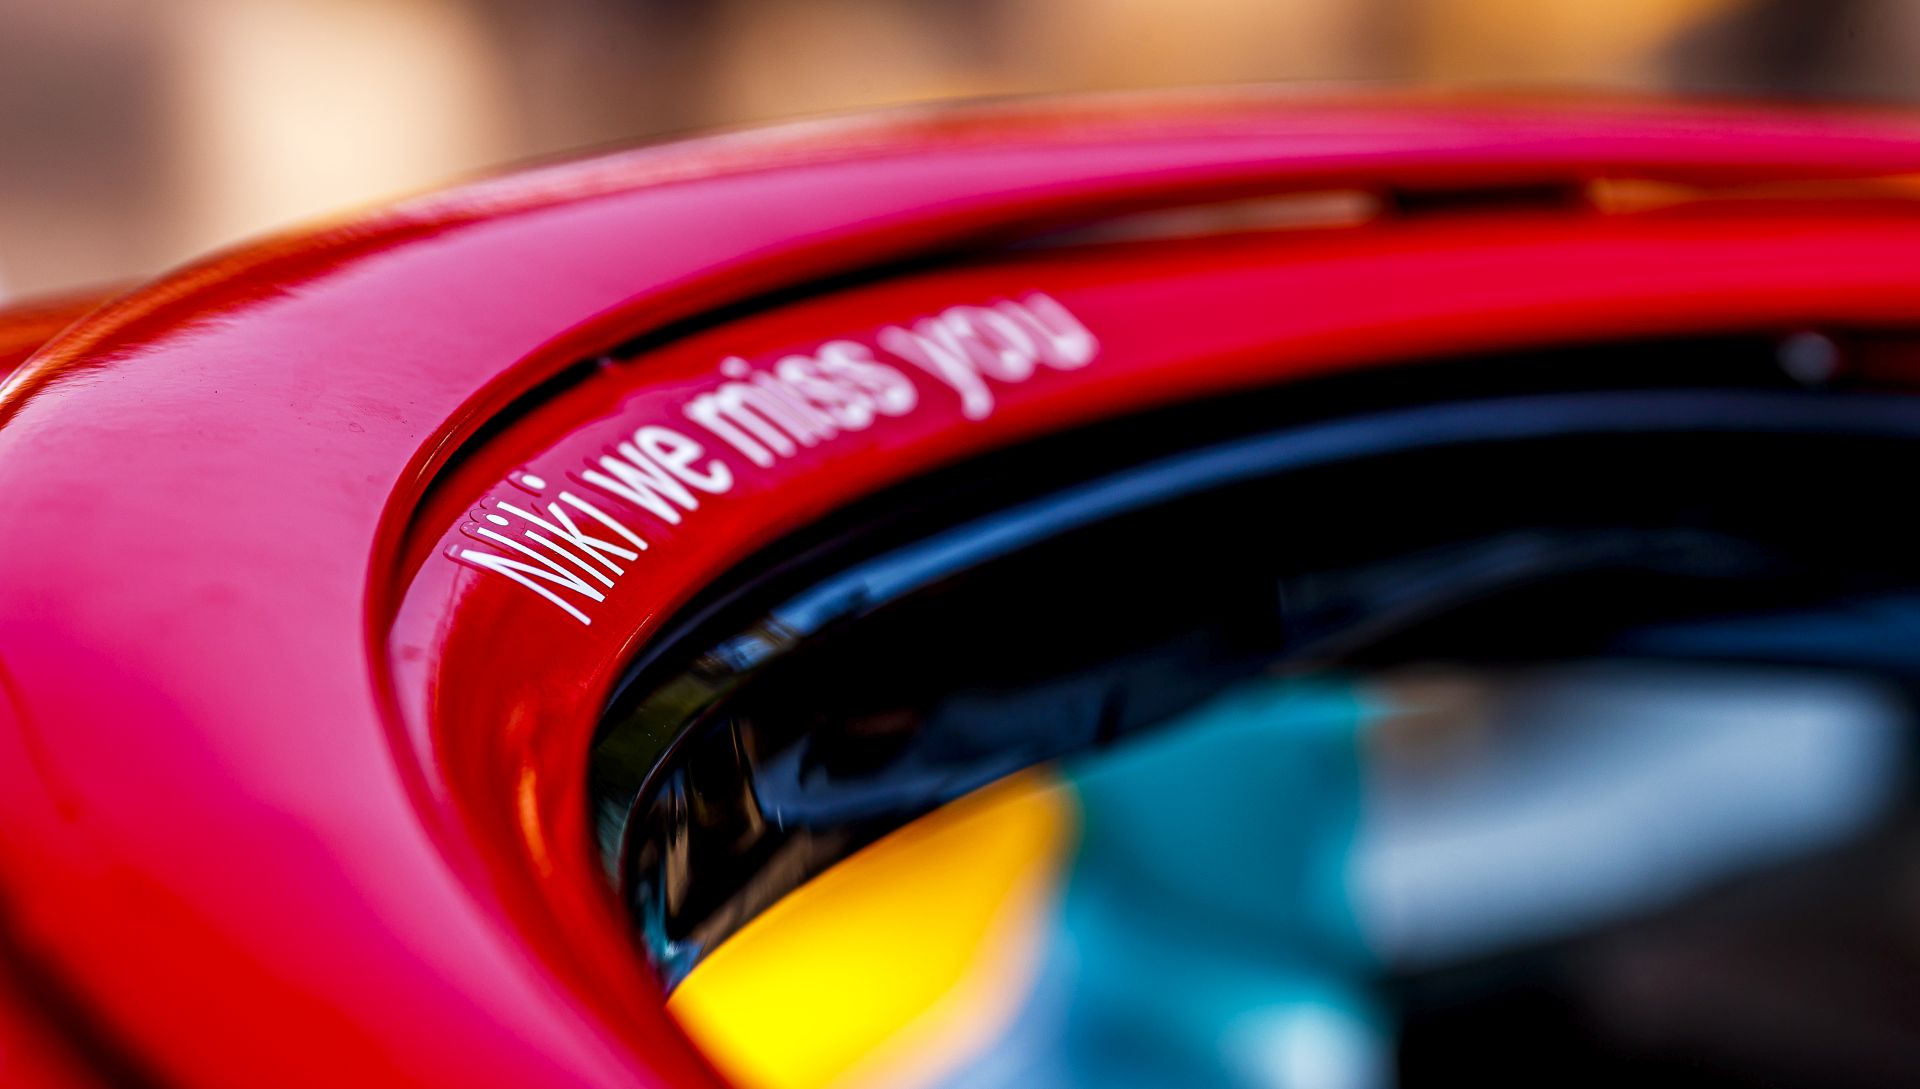 epa07597528 Halo cockpit cover reading a tribute to late Austrian Formula One legend Niki Lauda on the car of Finnish Formula One driver Valtteri Bottas of Mercedes AMG GP at the Monte Carlo circuit in Monaco, 24 May 2019. The 2019 Formula One Grand Prix of Monaco will take place on 26 May 2019.  EPA/SRDJAN SUKI